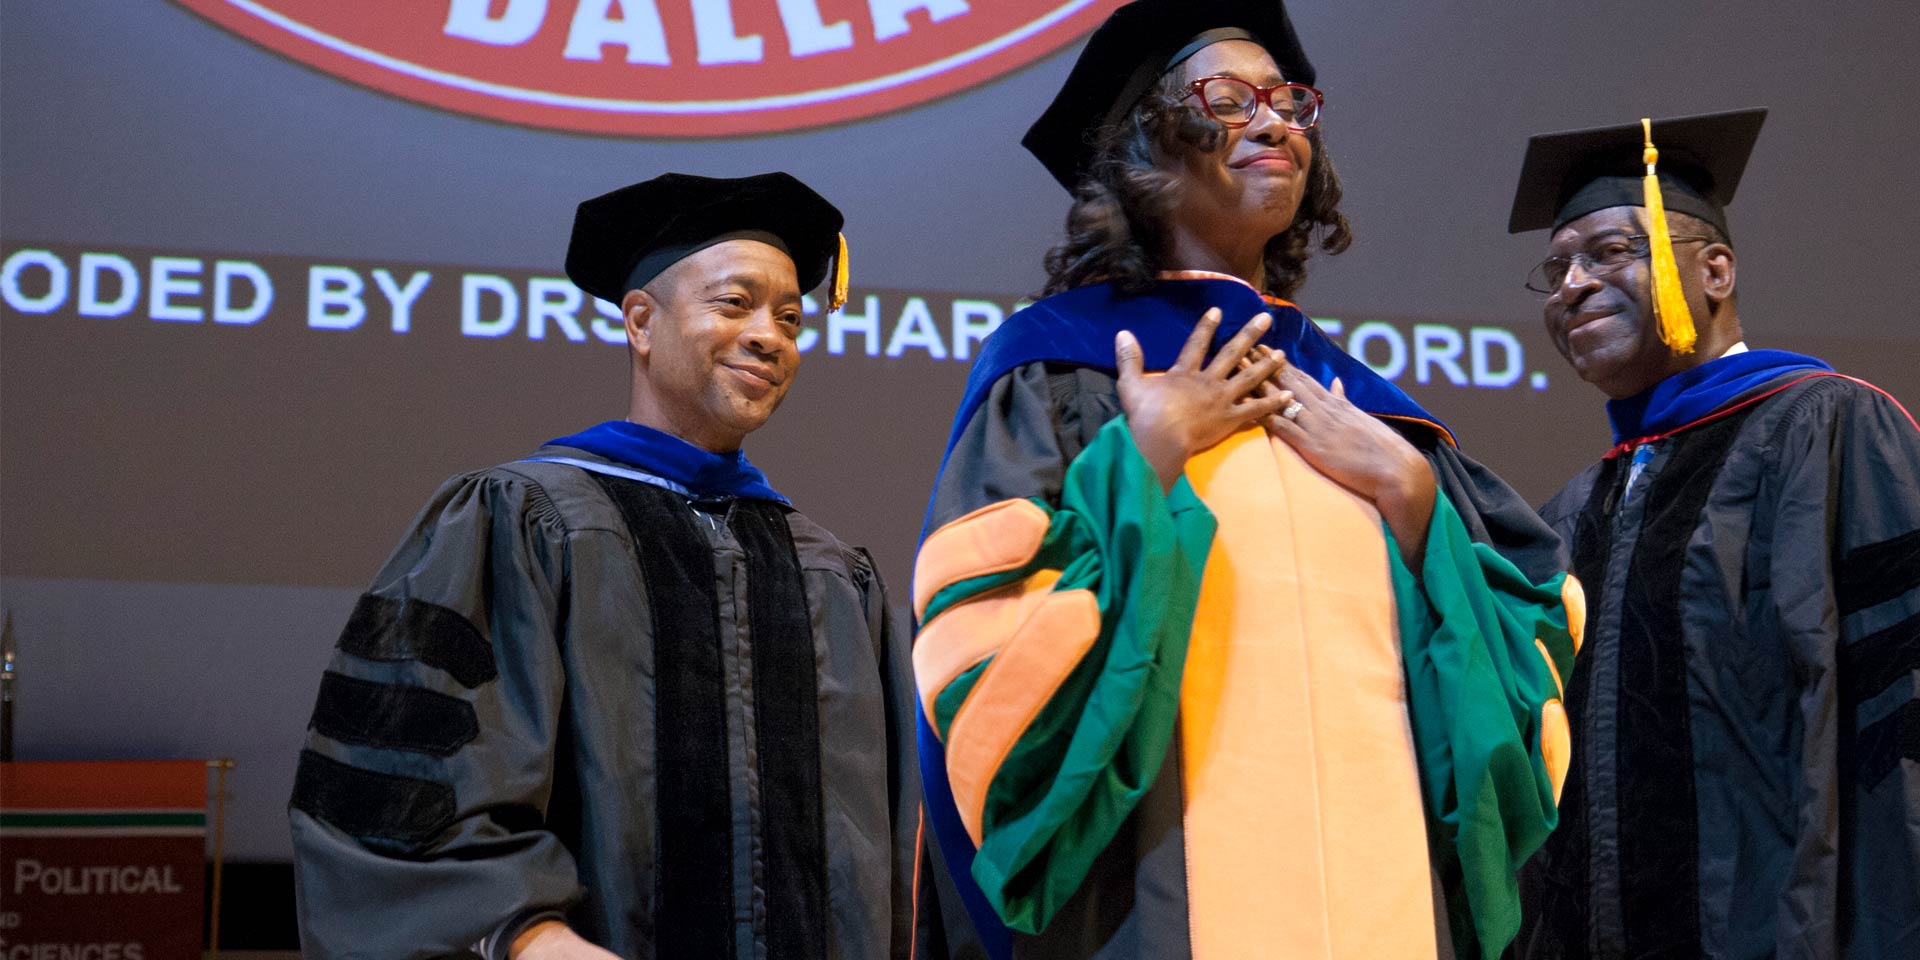 Dr. Carliss Miller PhD’16 is hooded by Dr. Orlando Richard, associate professor of organizations, and Dr. David Ford Jr., professor of organizations, strategy and international management.